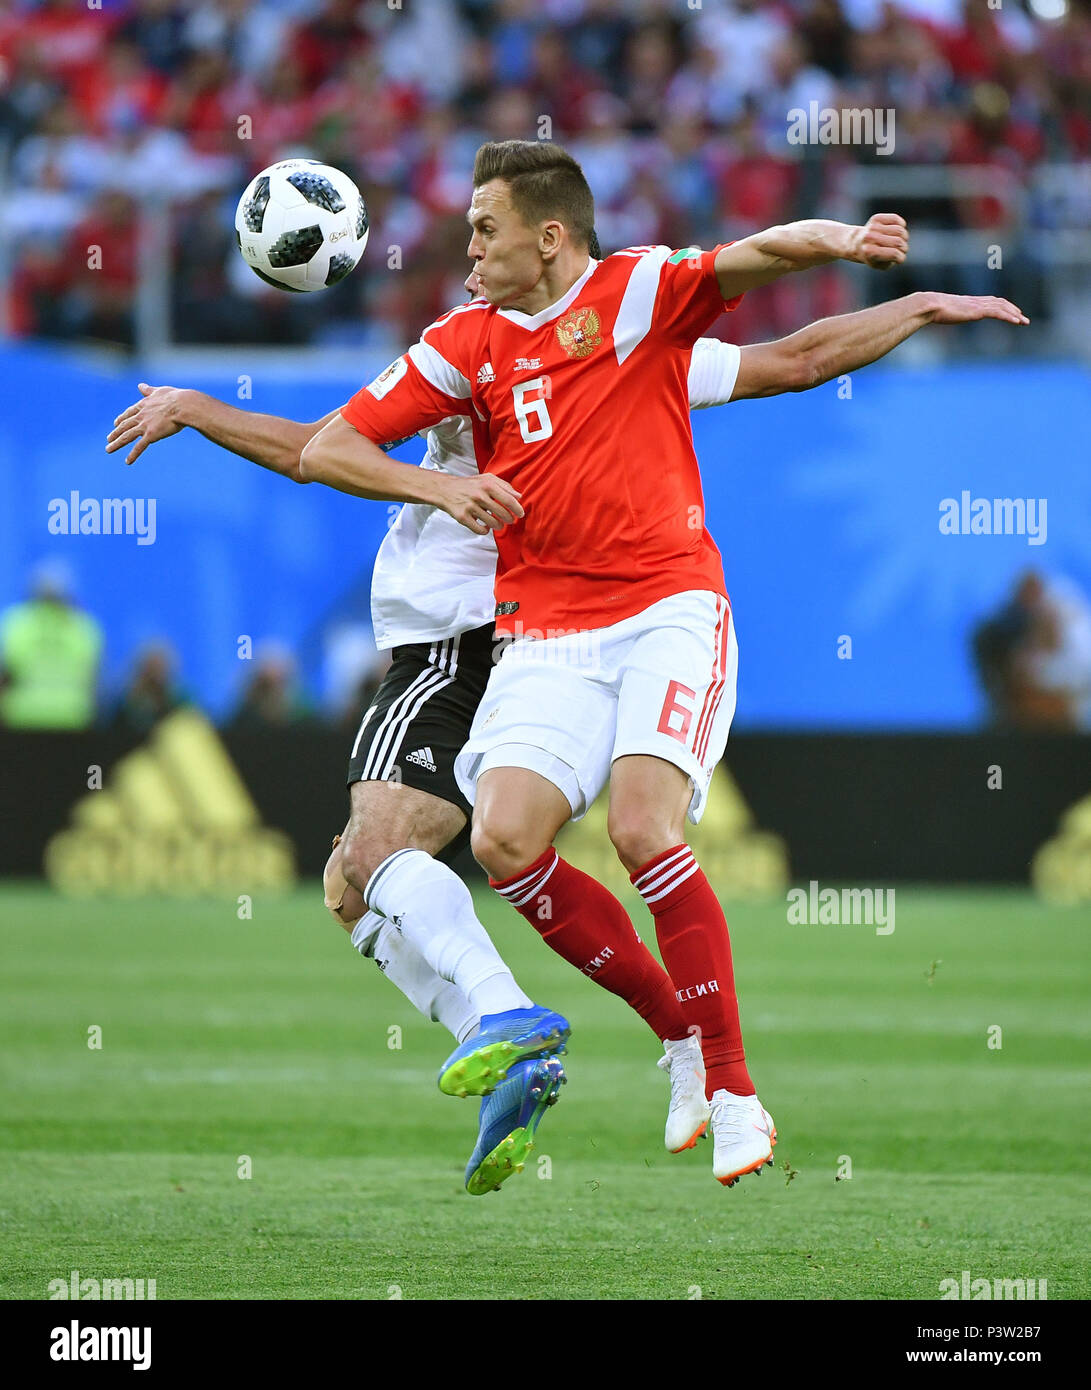 Saint Petersburg, Russia. 19th June, 2018. Denis Cheryshev (front) of Russia competes during a Group A match between Russia and Egypt at the 2018 FIFA World Cup in Saint Petersburg, Russia, June 19, 2018. Credit: Li Ga/Xinhua/Alamy Live News Stock Photo